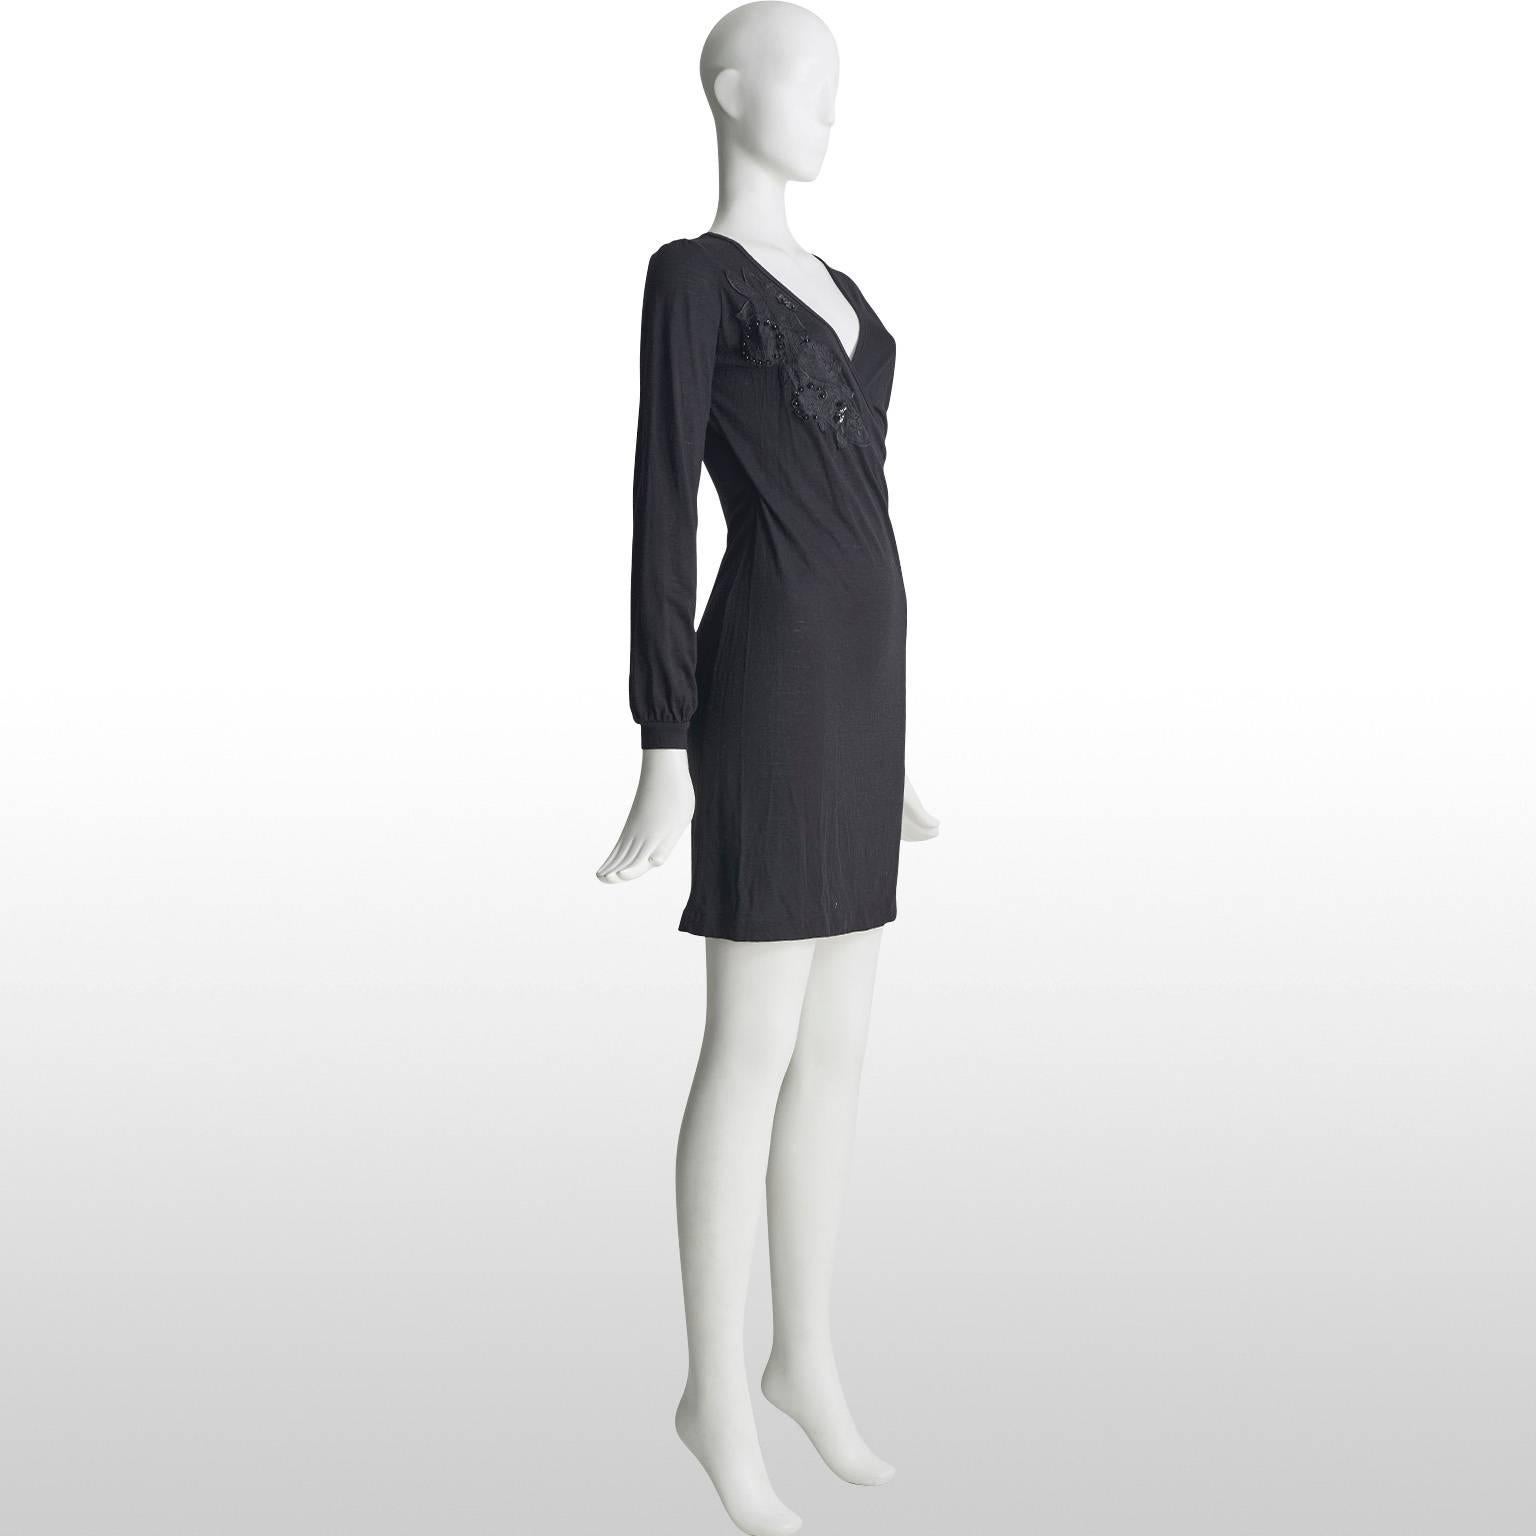 Vanessa Bruno black v neck wrap over style dress featuring an applique floral detailing down the right side of the dress. Simple, yet striking, this piece is perfect for day way and can easily be transitioned from the office to the cocktail bar.